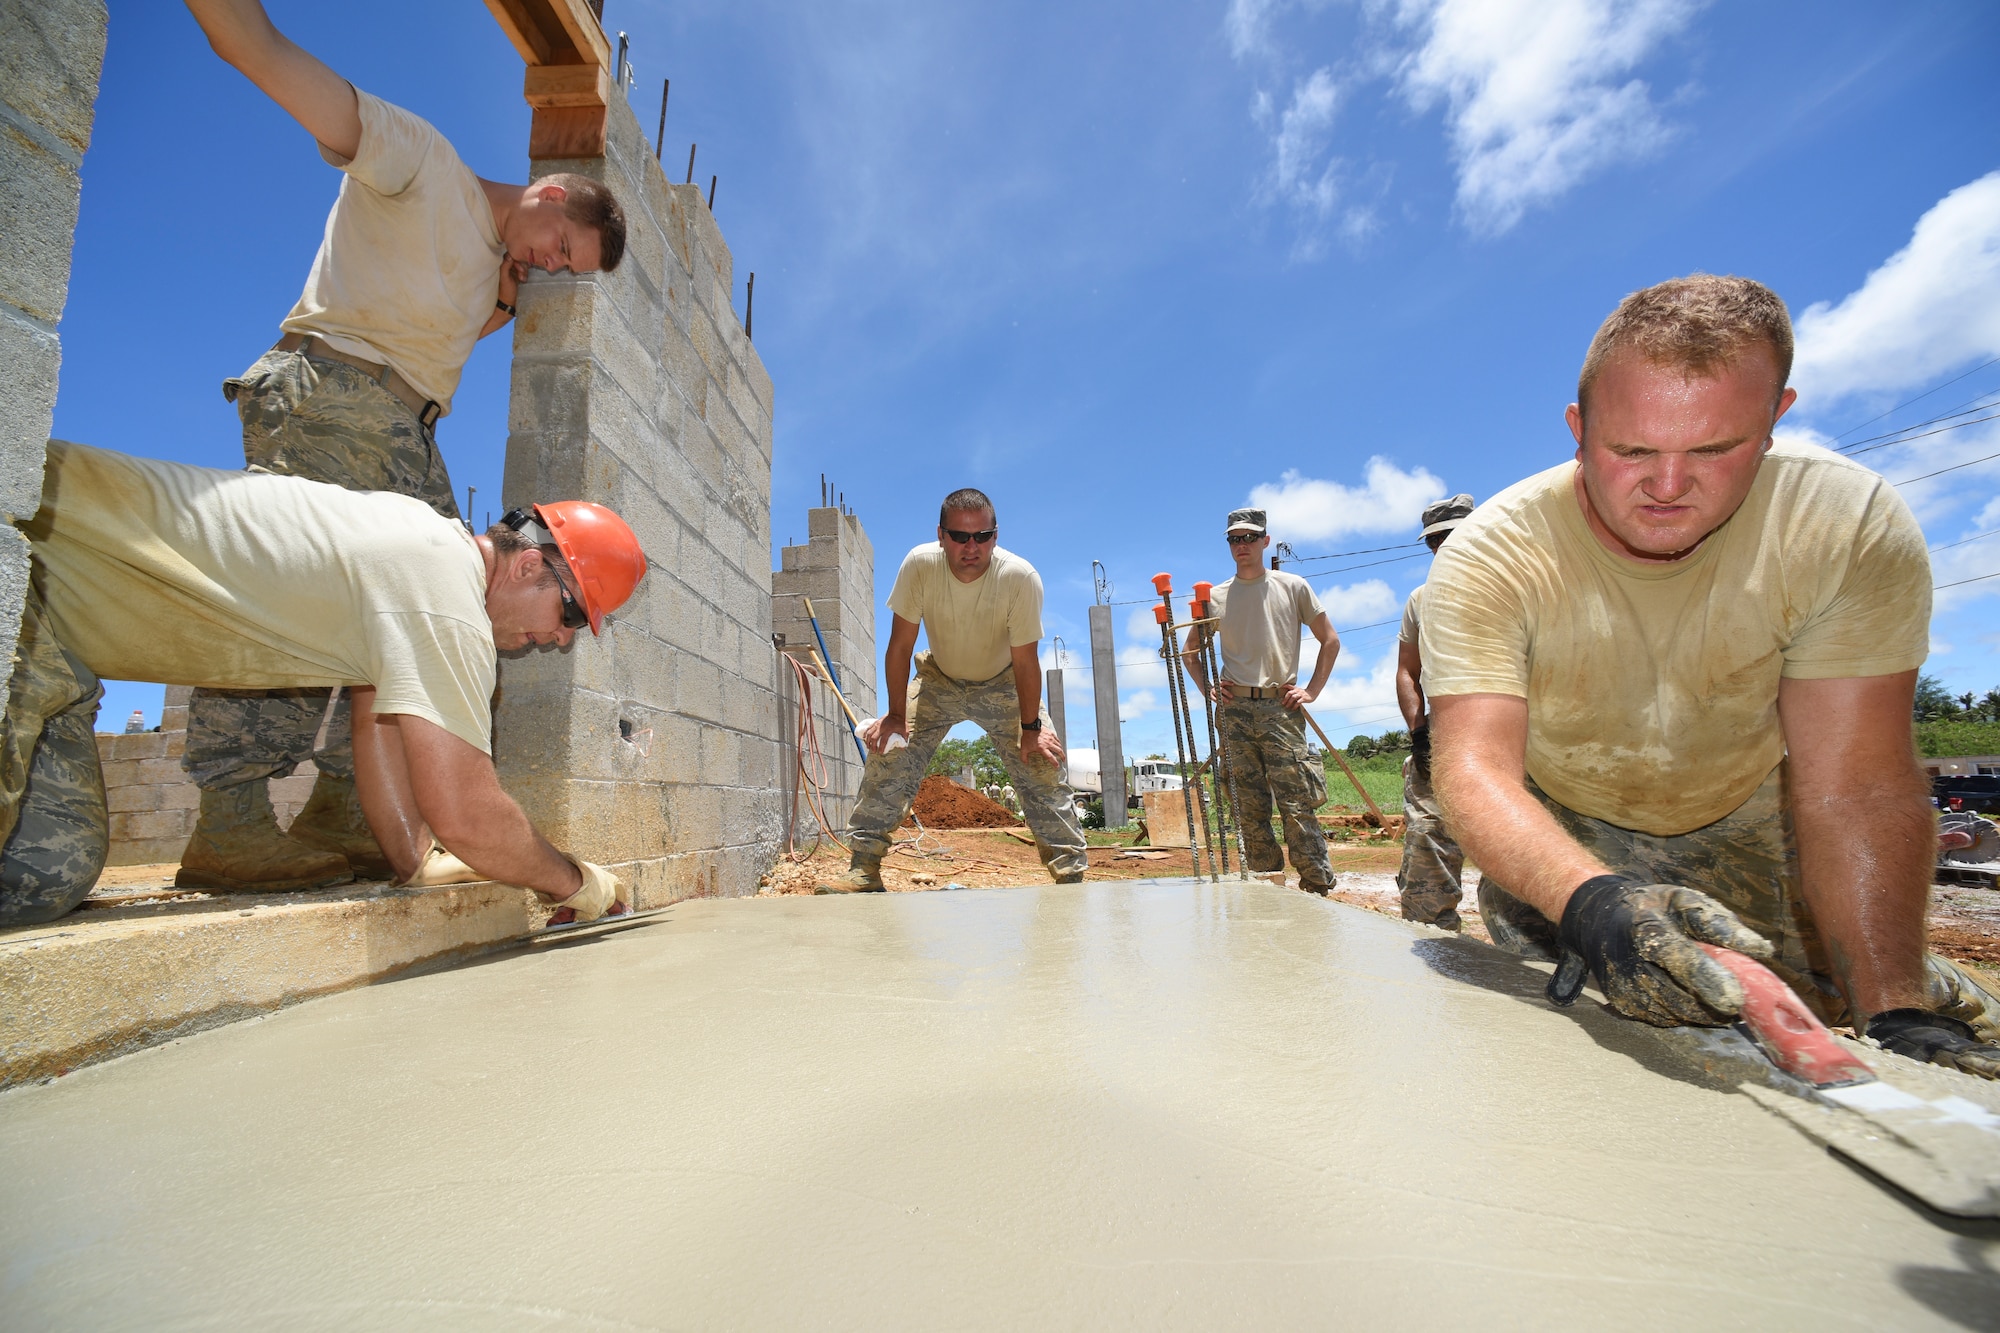 Maj. Jody W. Page, 114th Civil Engineer Squadron commander, oversees Airmen screeding a front porch concrete slab during the third phase of a multi project house build for Habitat for Humanity of Guam(HFHG), Inarajan, July 14, 2016. Airmen from the 114th Fighter Wing deployed to the Island of Guam to gain real world construction training as they assisted HFHG on the construction of two single family homes. (U.S. Air National Guard photo by Staff Sgt. Luke Olson/Released)